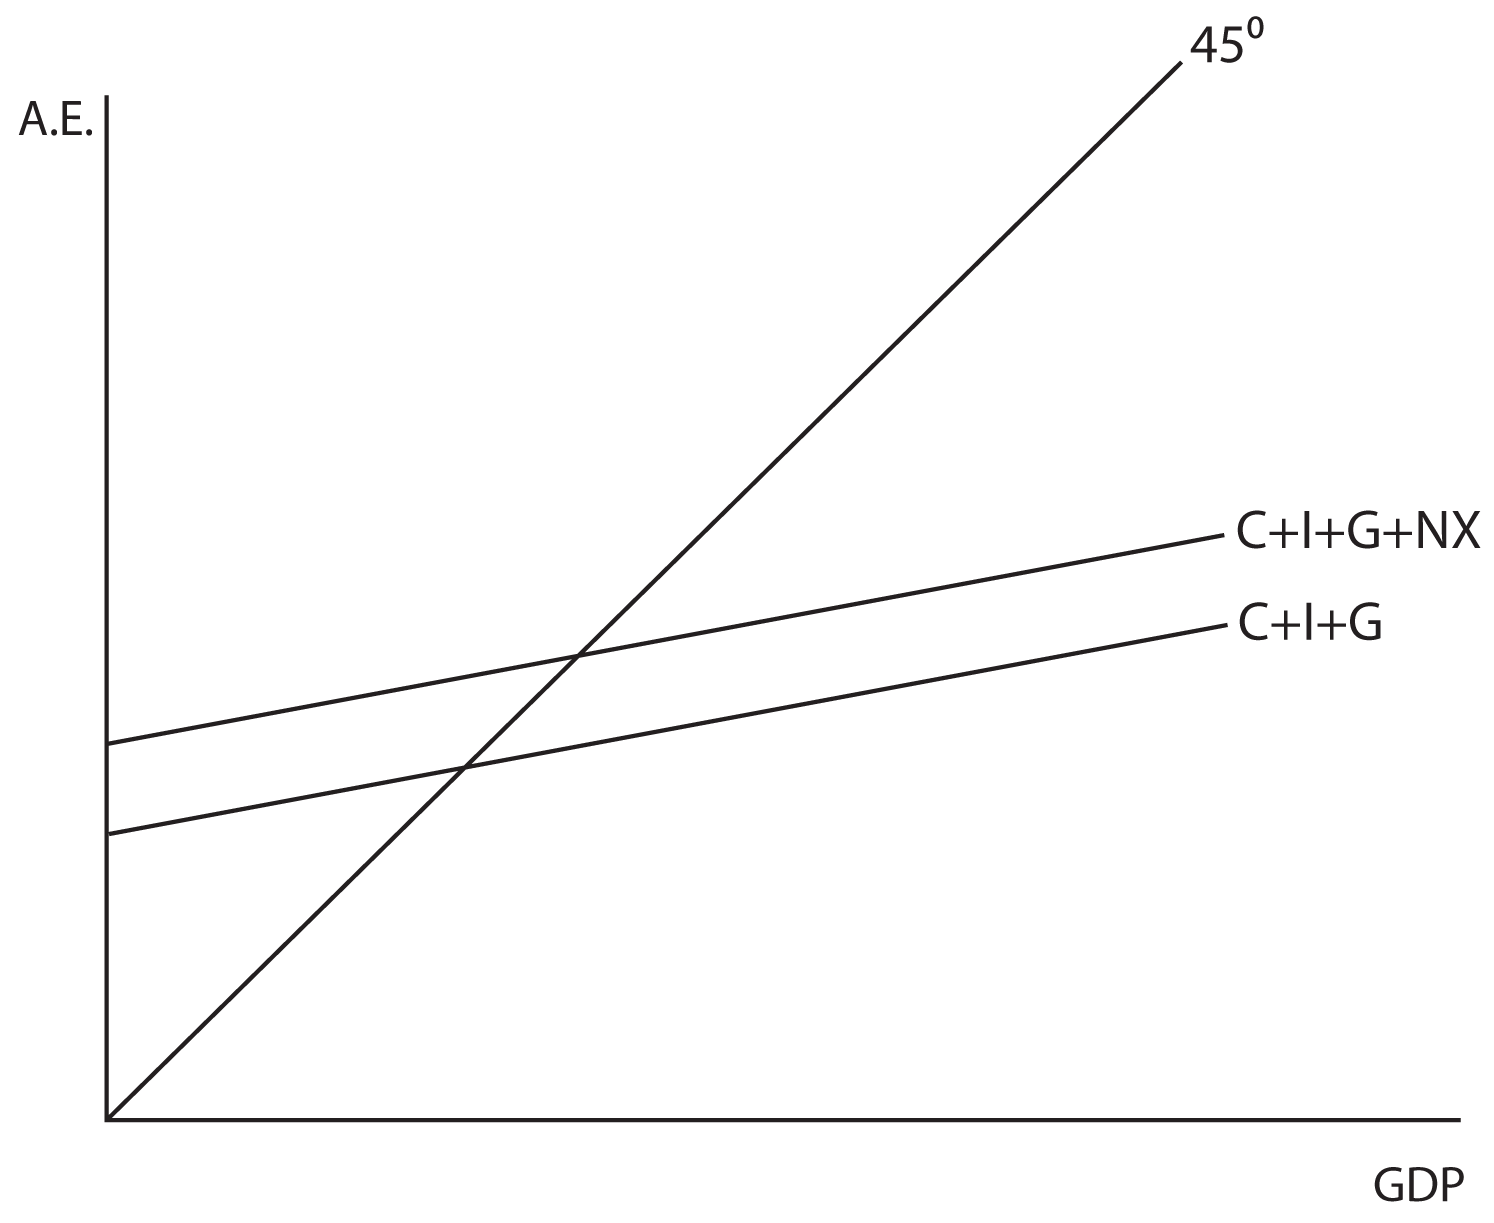 Image 7.15: The image shows a graph. The y axis is labeled A.E. The x axis is labeled GDP. There is a 45 degree line drawn from the origin. There are two lines drawn from the y axis, the first has a slope of C+I+G, the second has a slope of C+I+G+Nx.